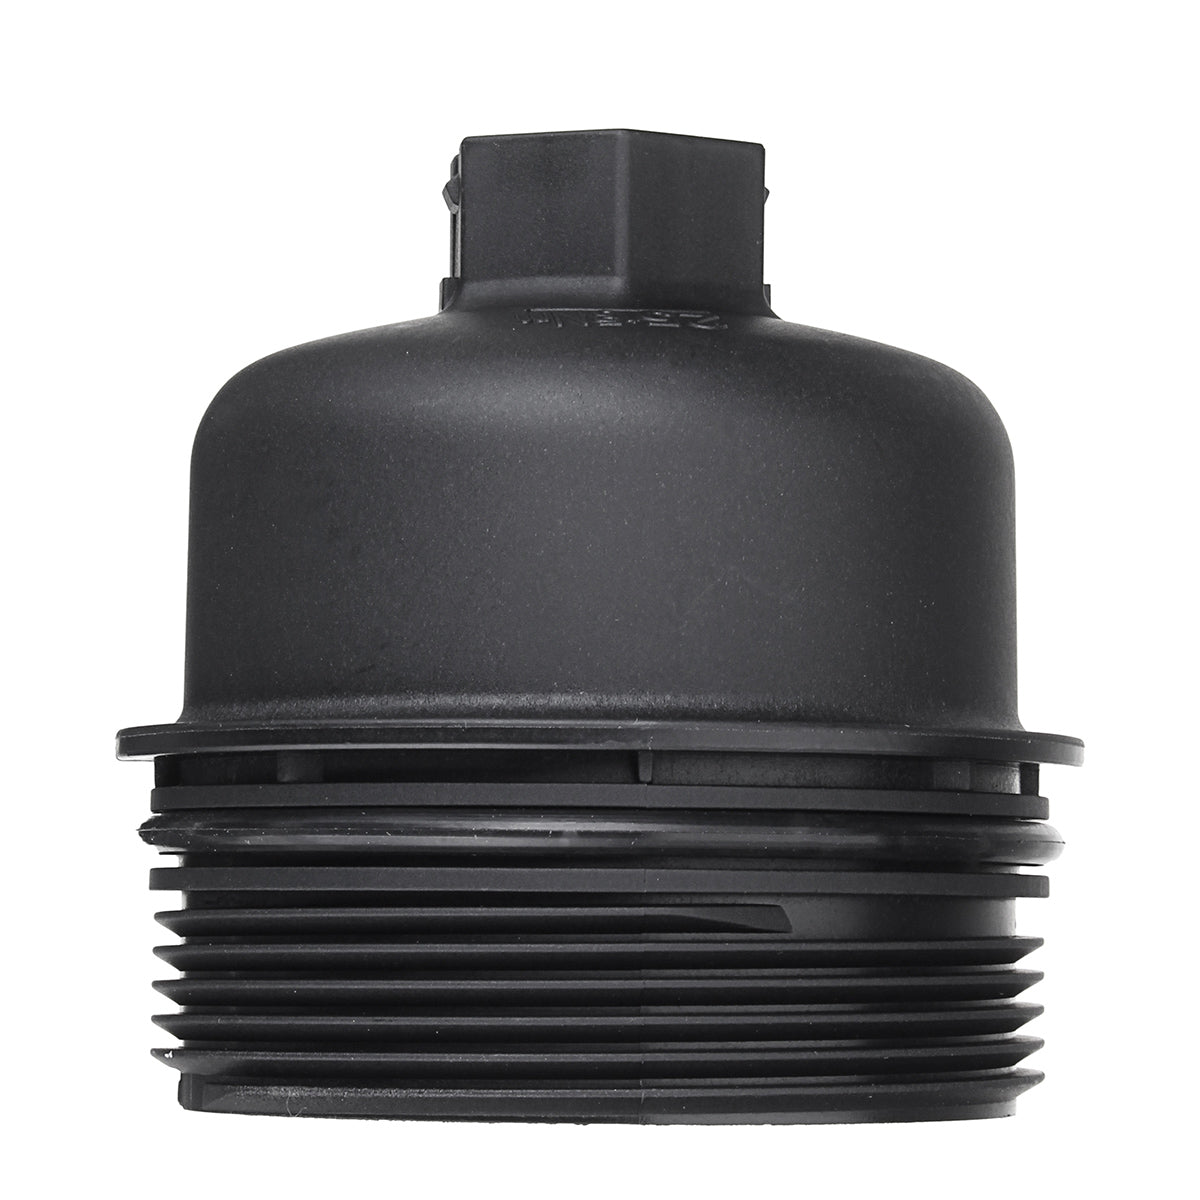 Dark Slate Gray Oil Filter Lid Housing Top Cover Cap For Ford Transit MK7 Galaxy Mondeo Focus